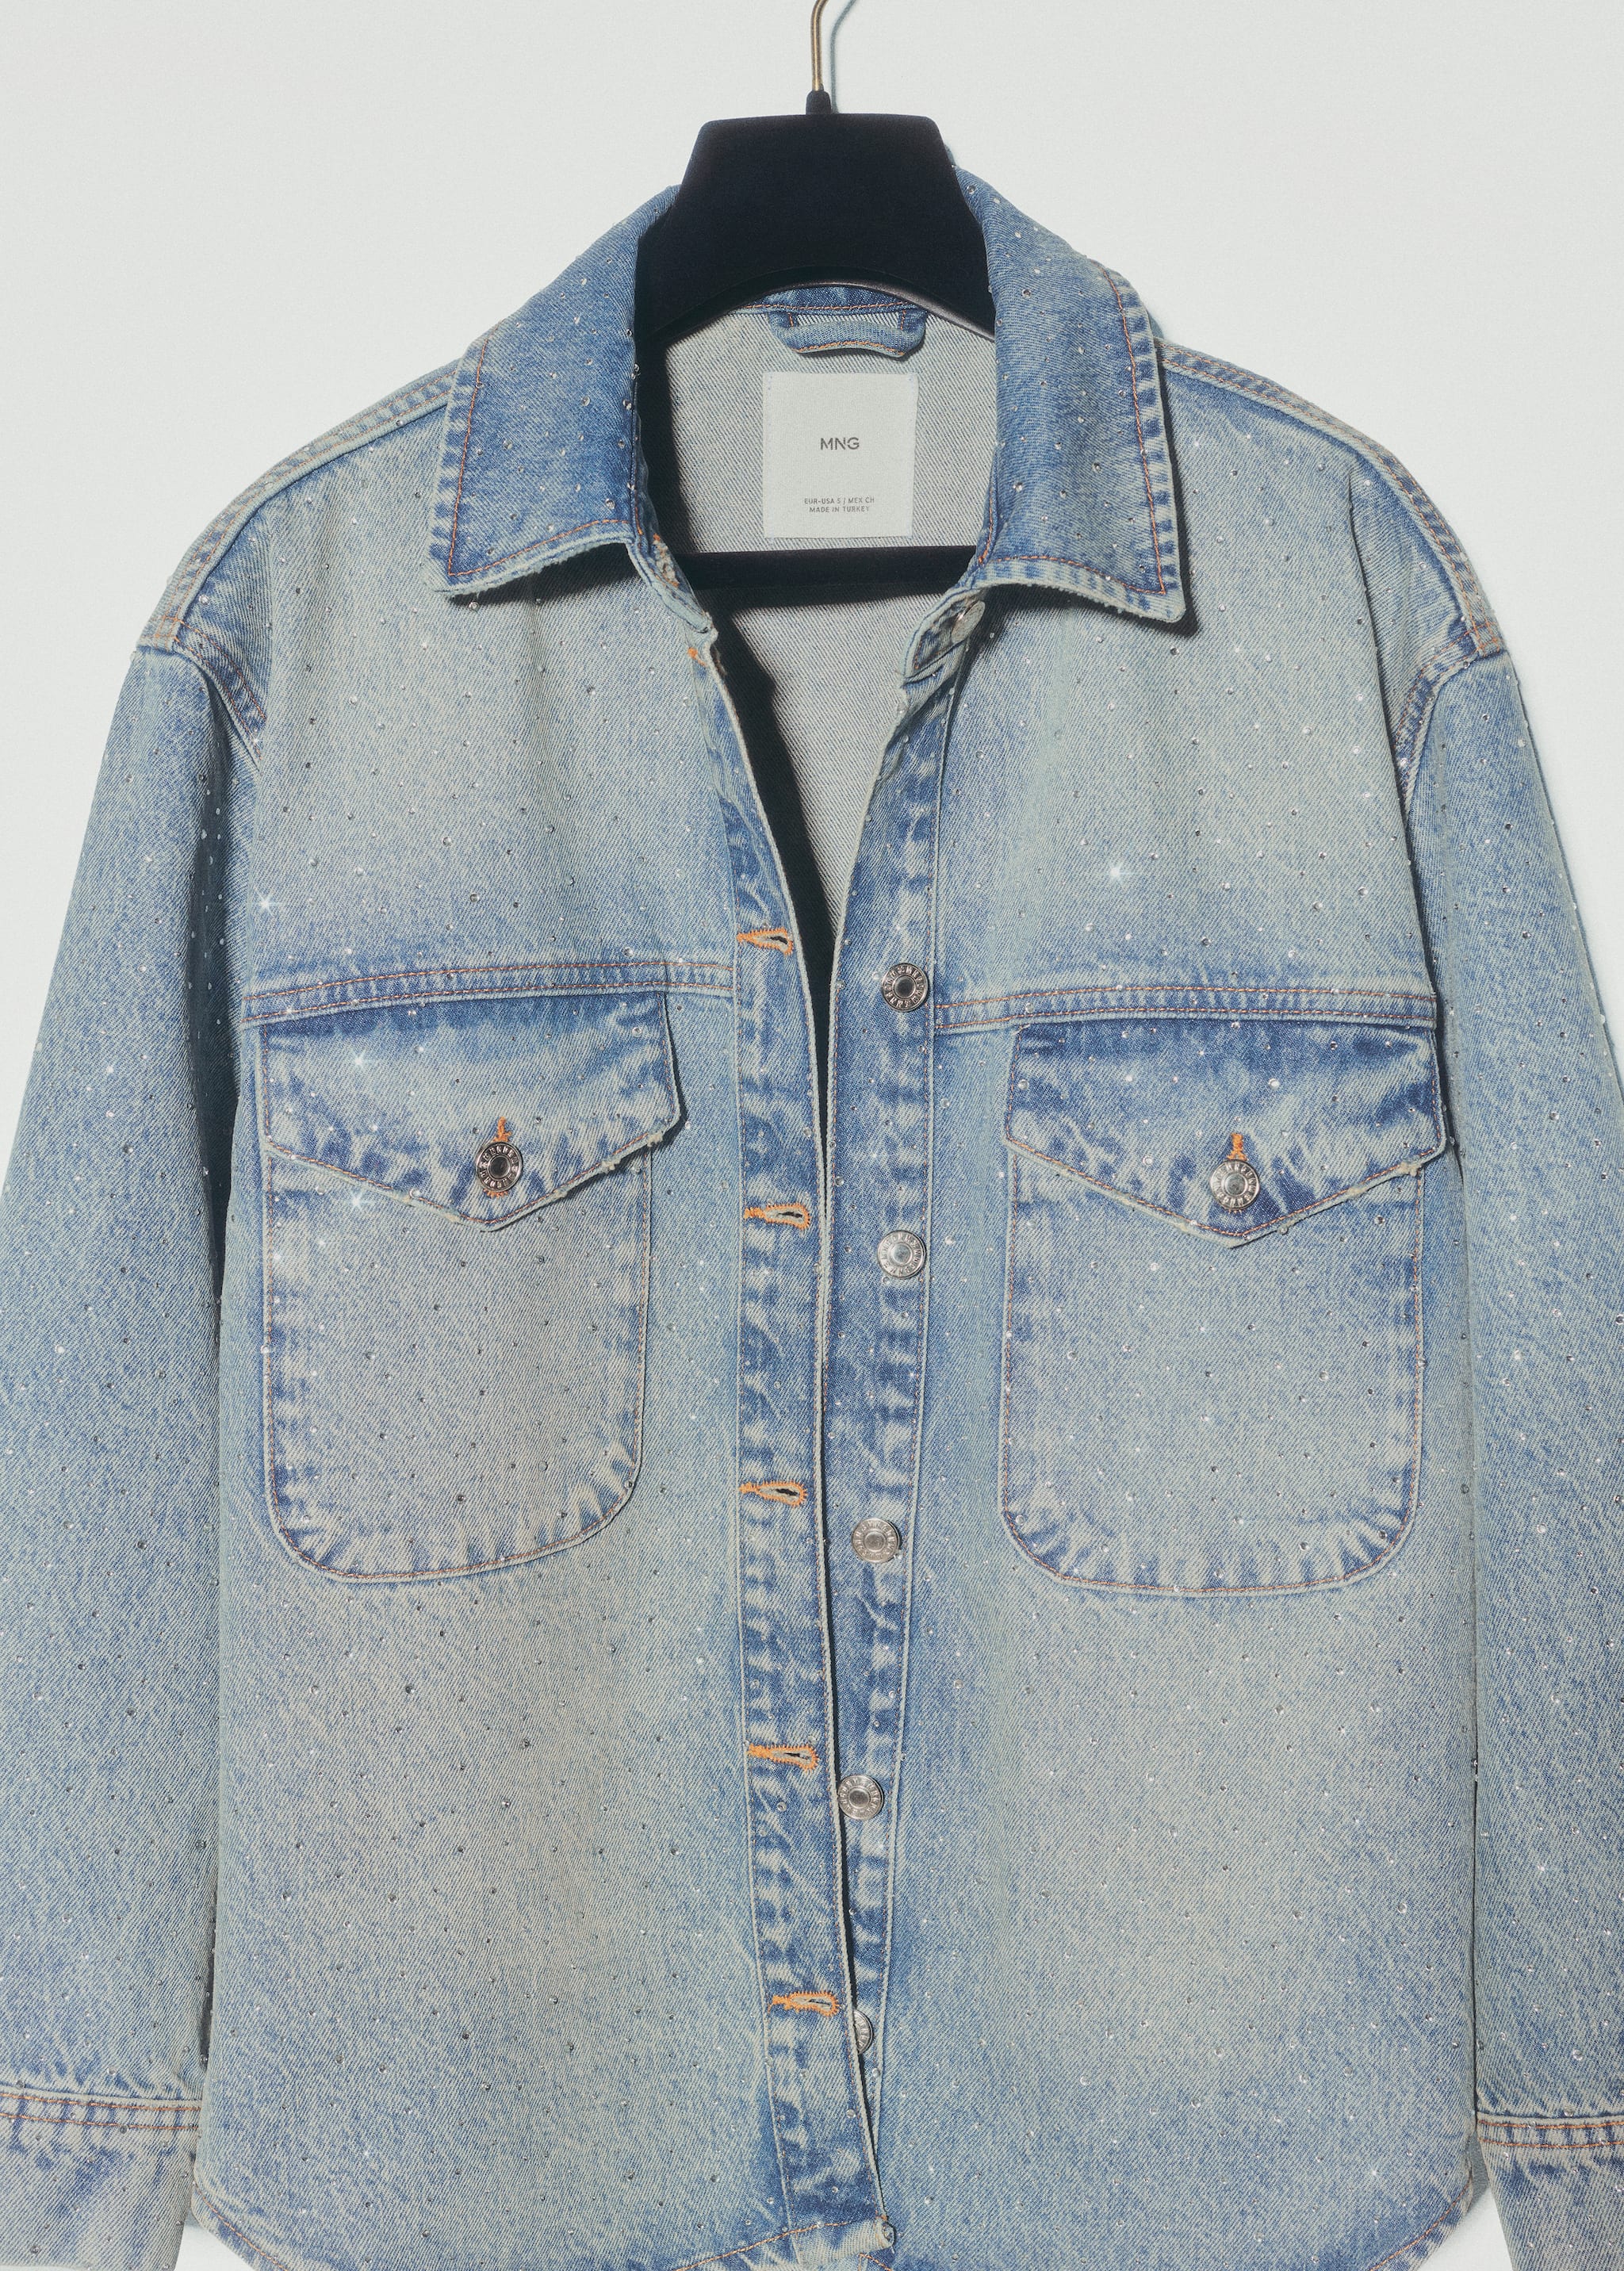 Denim jacket with rhinestones - Details of the article 5